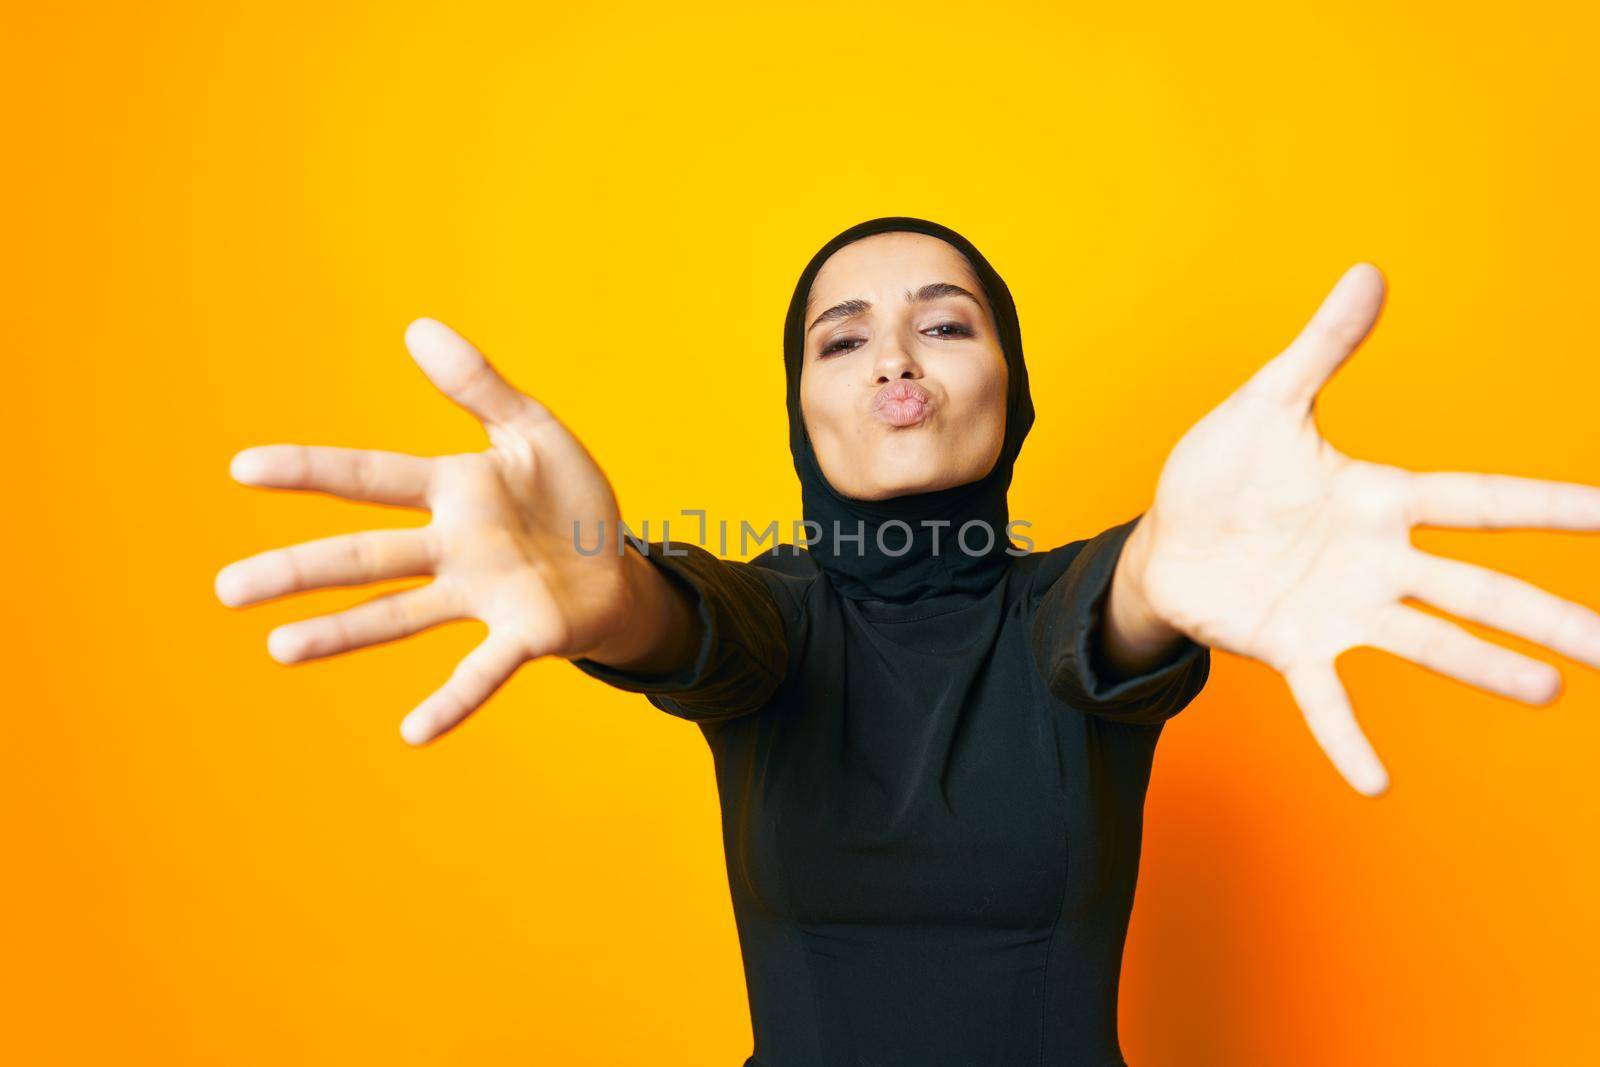 arab woman happiness fashion clothing hand gesture yellow background. High quality photo